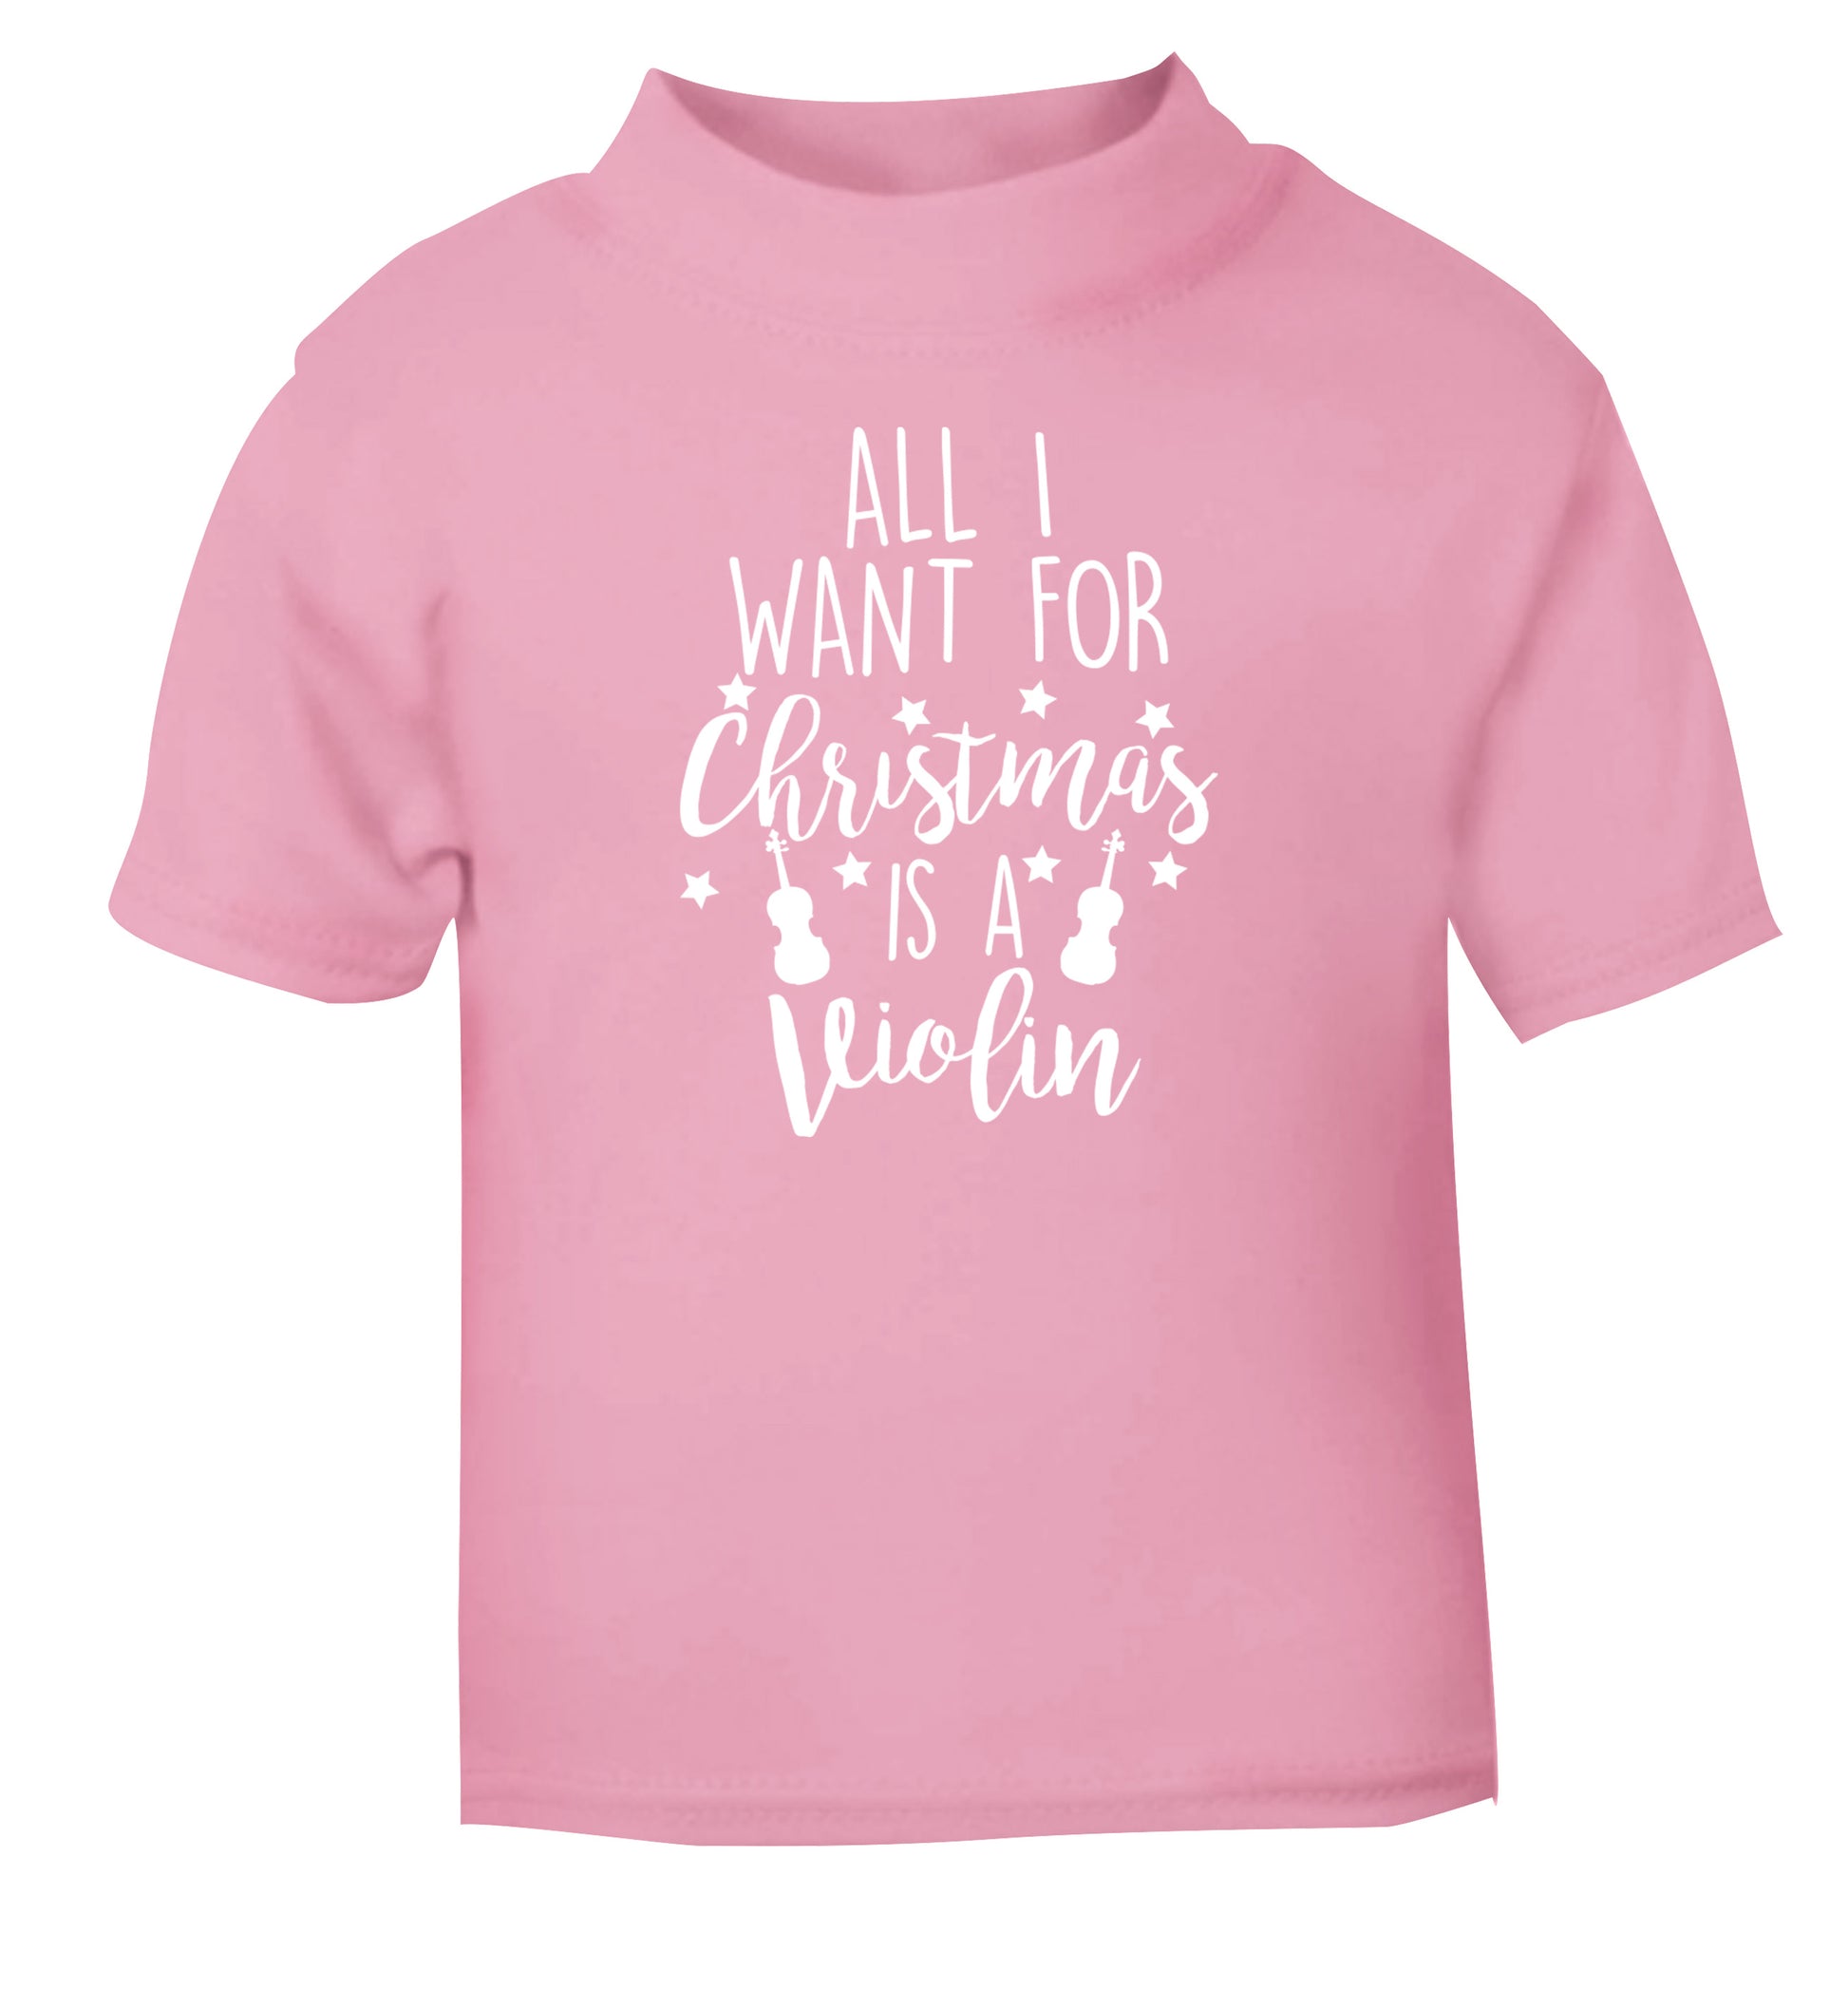 All I Want For Christmas is a Violin light pink Baby Toddler Tshirt 2 Years